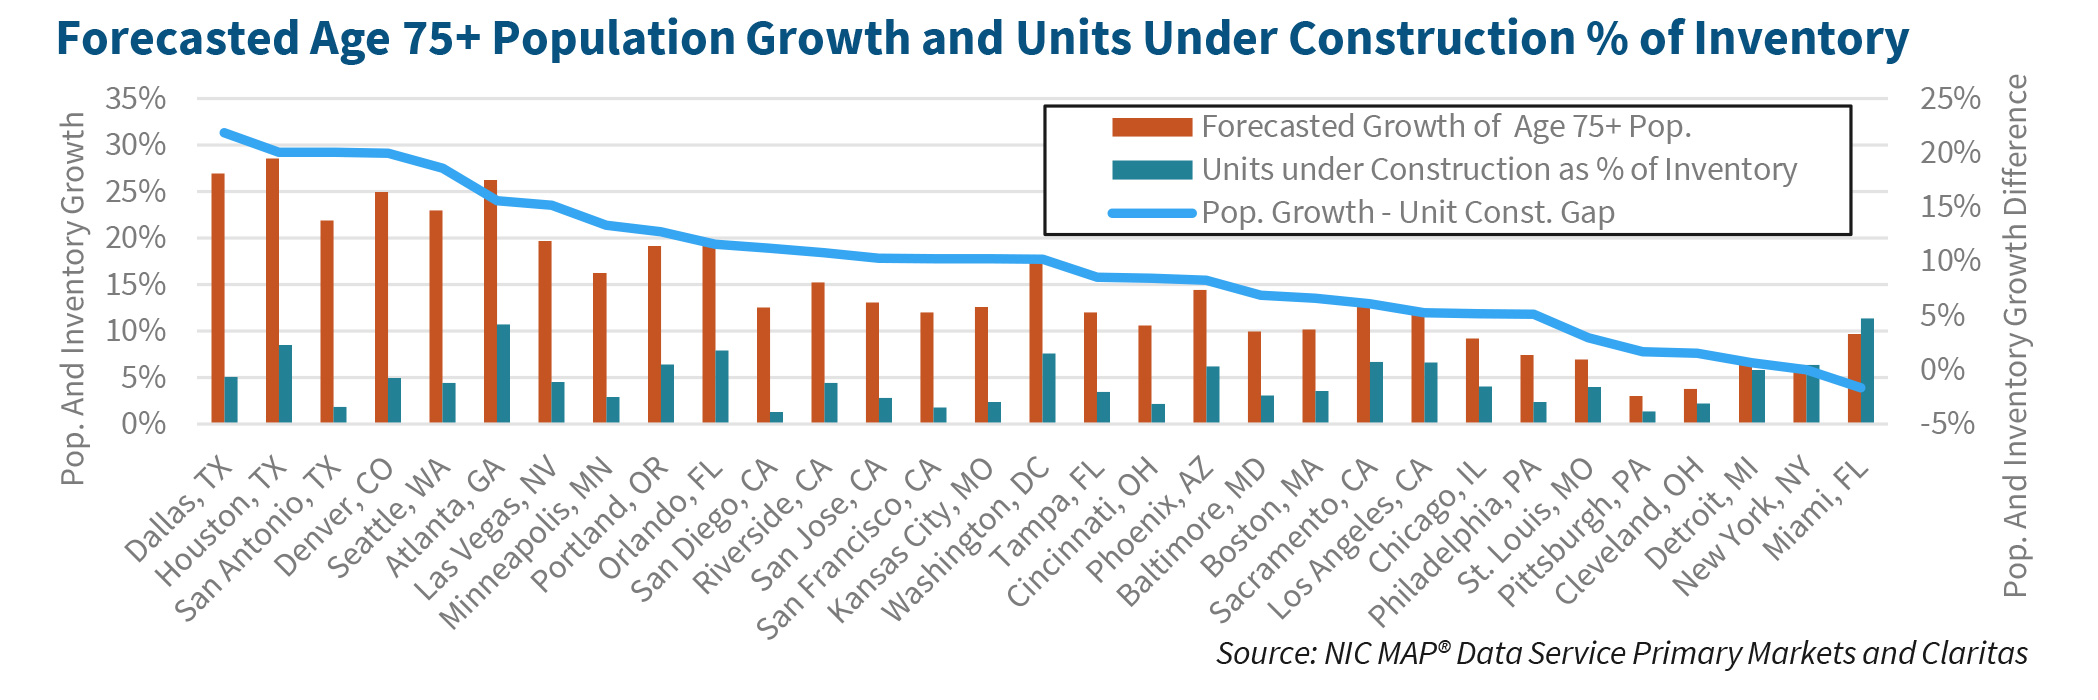 Forecasted Age 75+ Population Growth and Units Under Construction % of Inventory